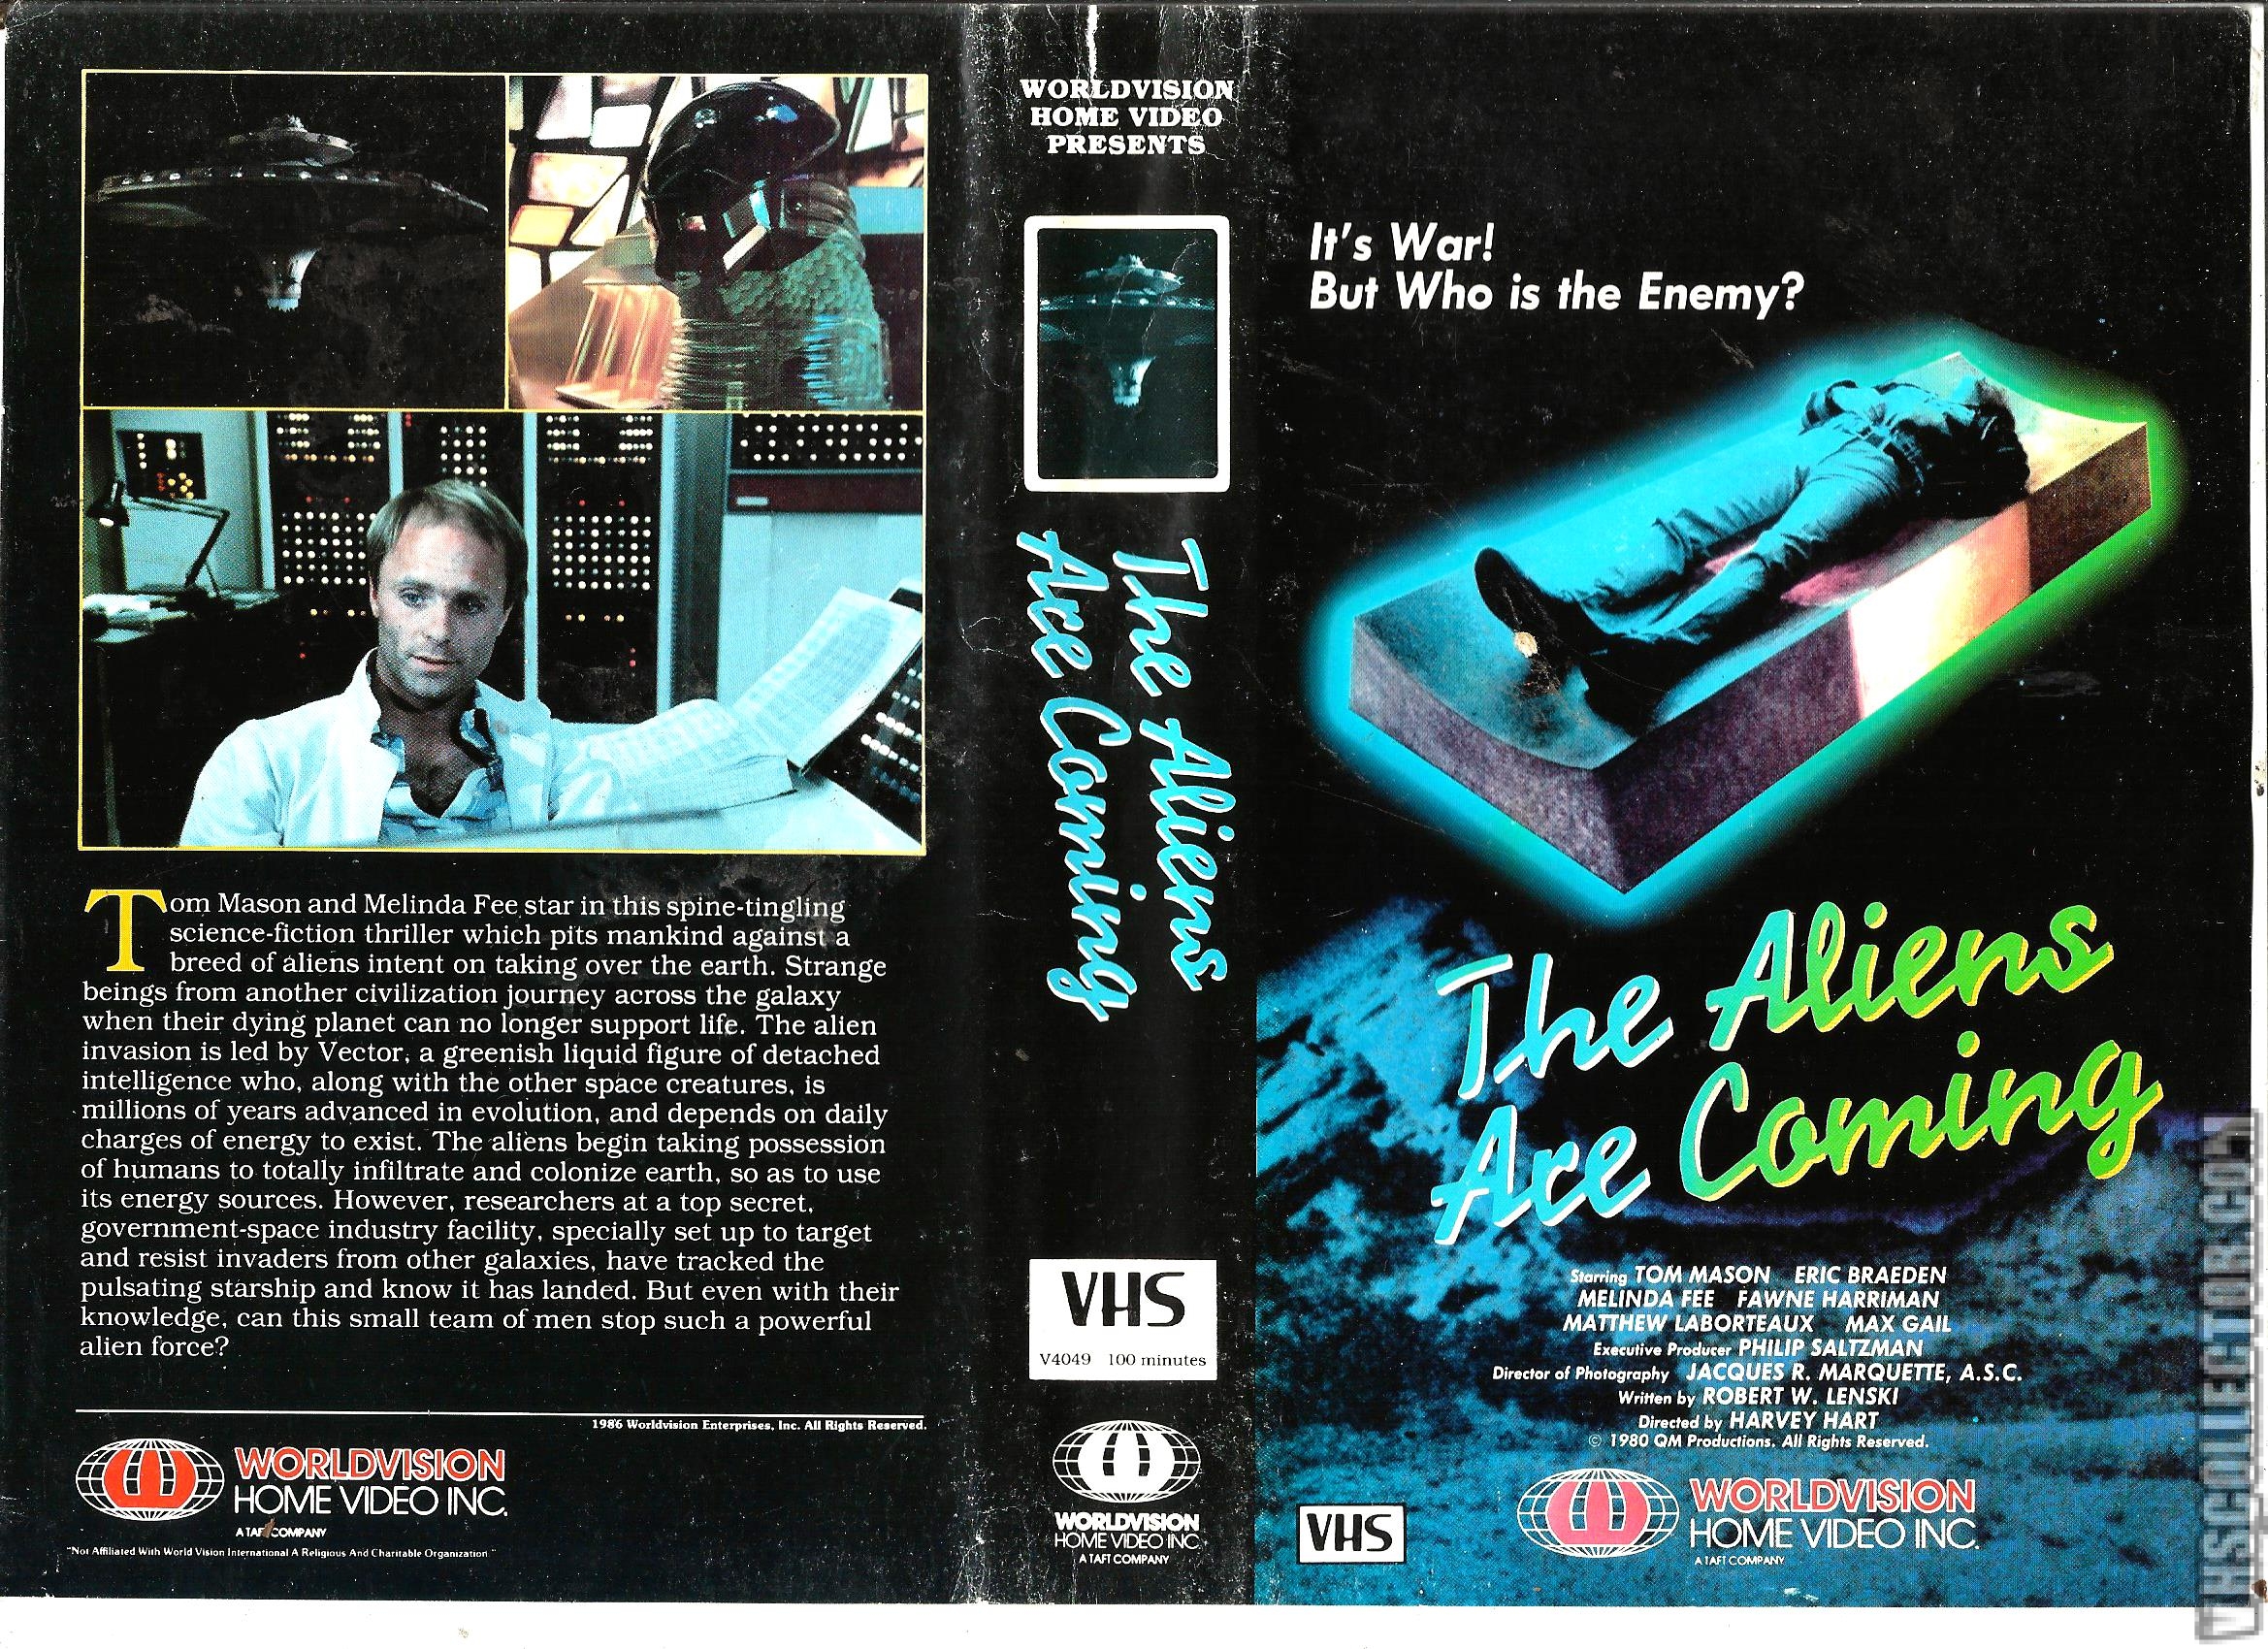 The Aliens are Coming | VHSCollector.com